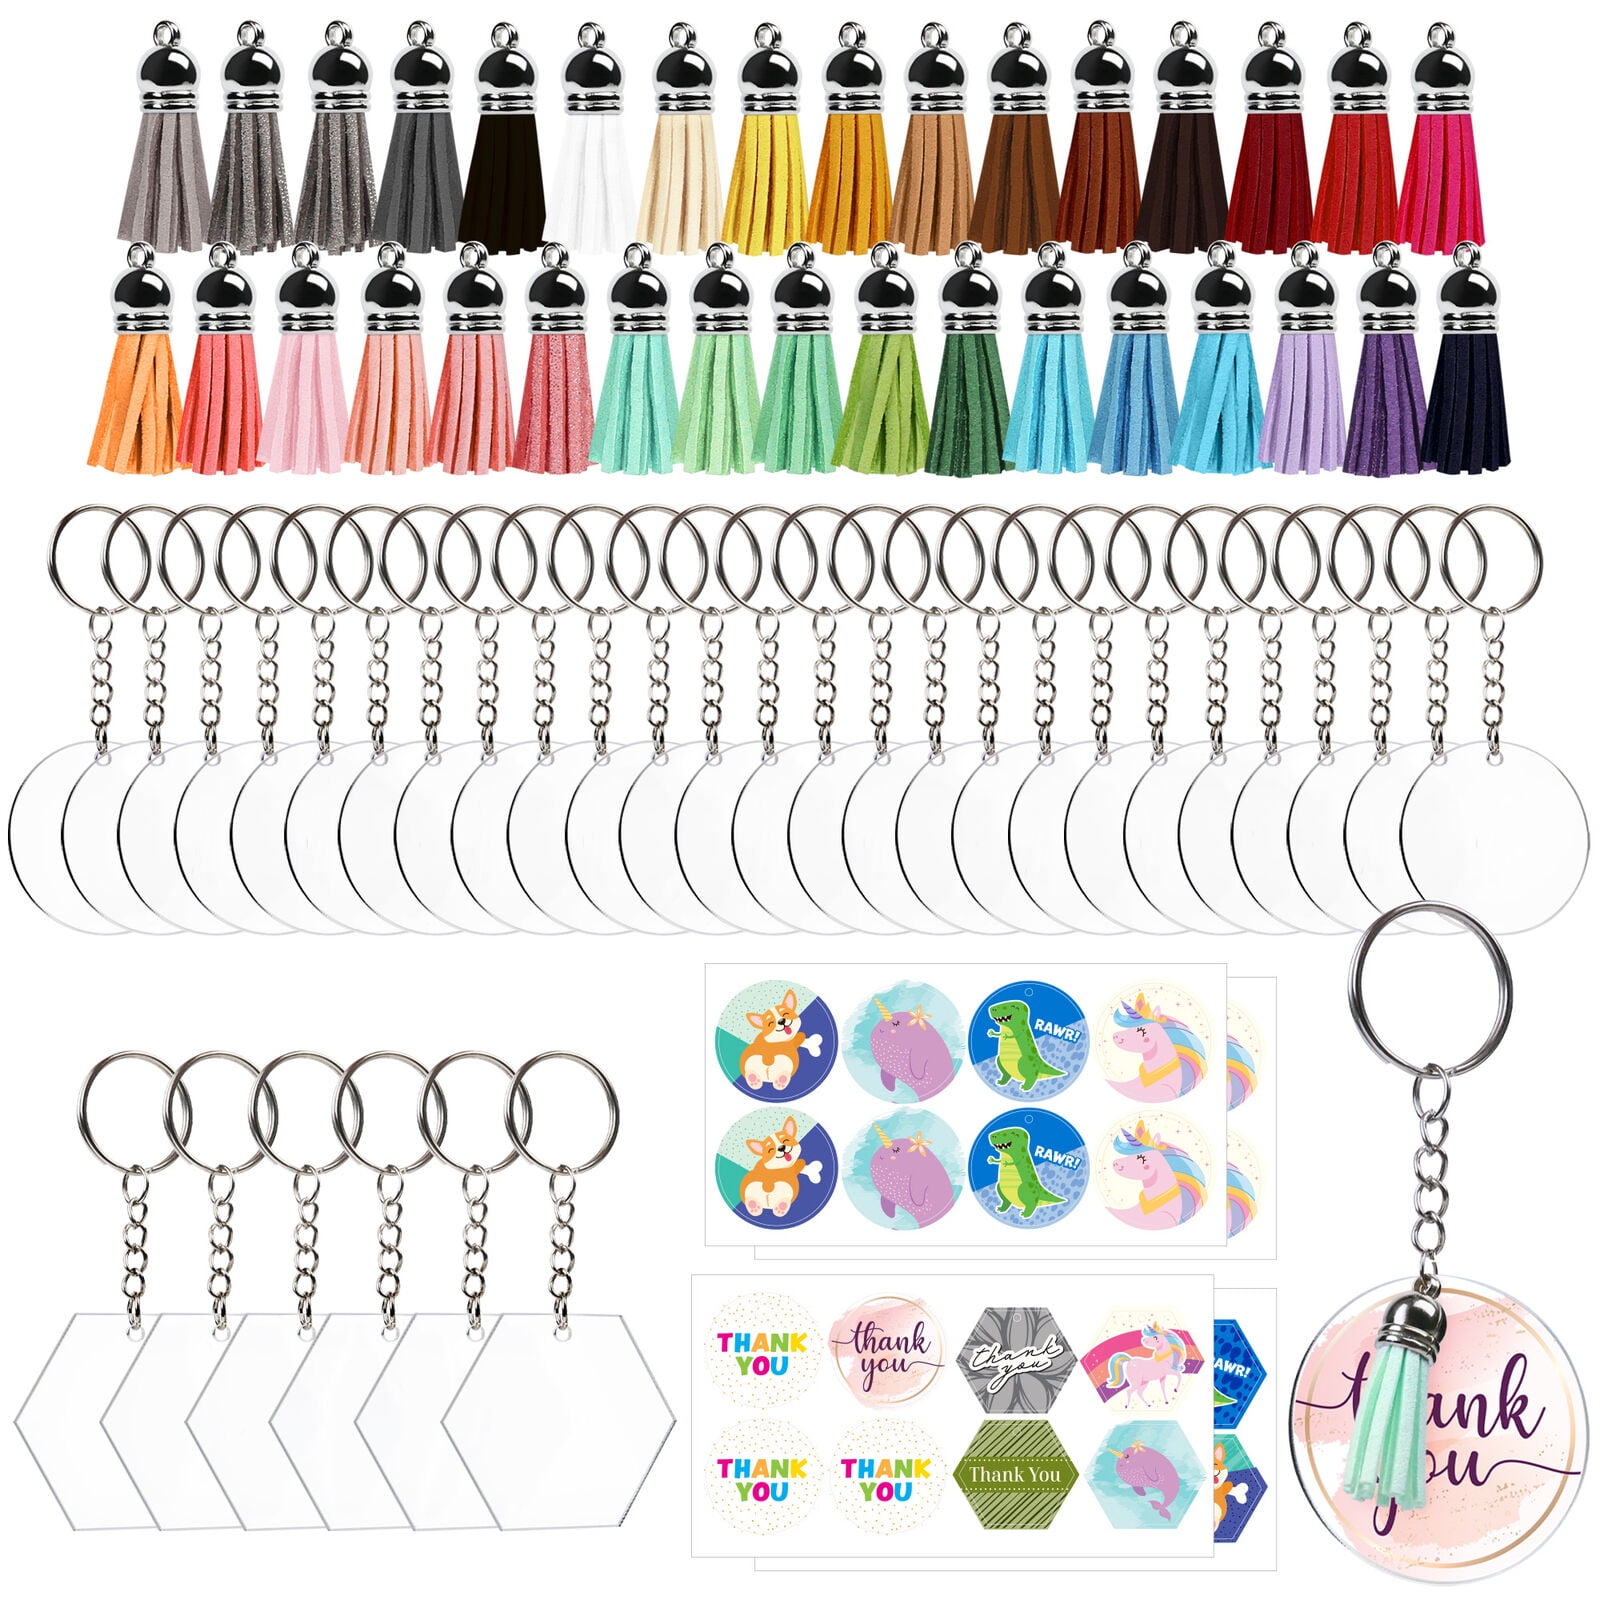 NOTIONSLAND Acrylic Transparent Circle Blanks Keychain Tassels 48Pcs/Set Keyring Tassels Pendant for DIY Key Rings Projects and Crafts